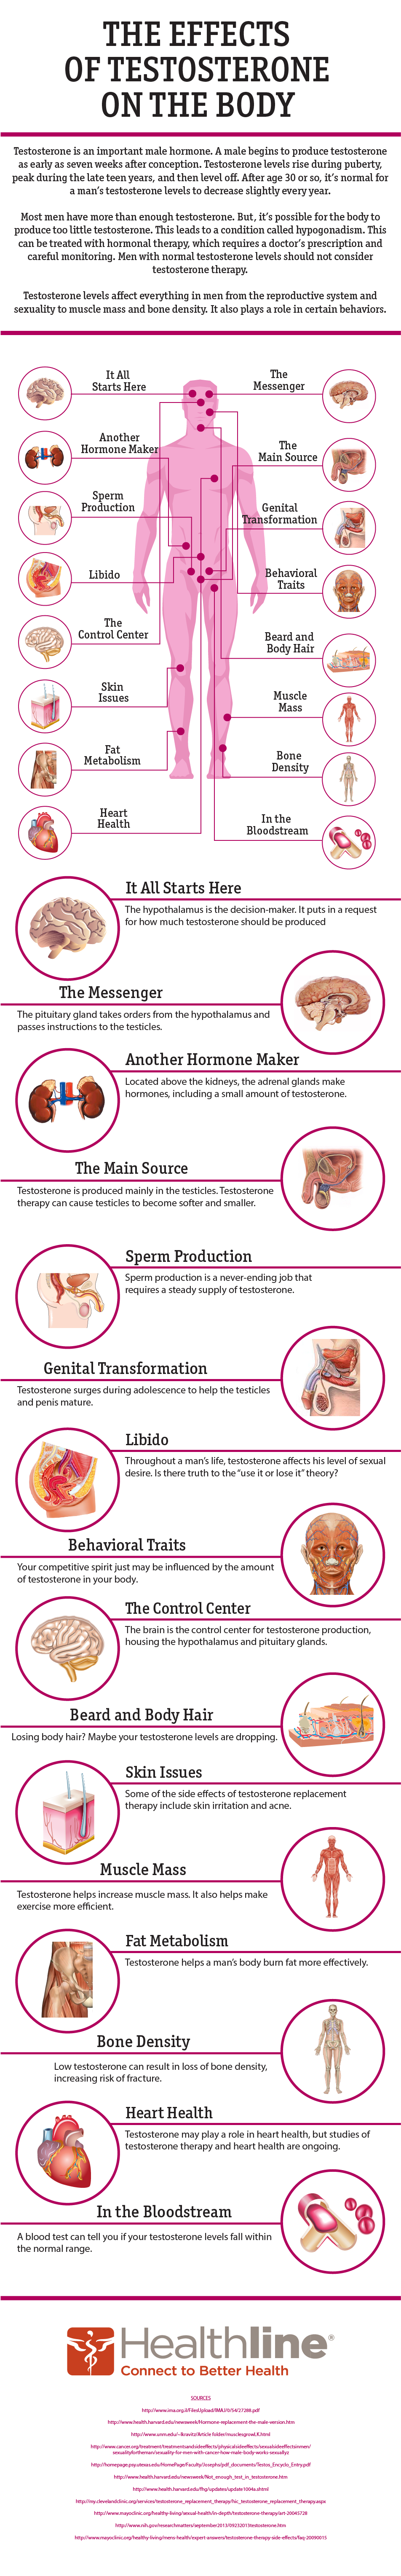 The Effects of Testosterone on the Body